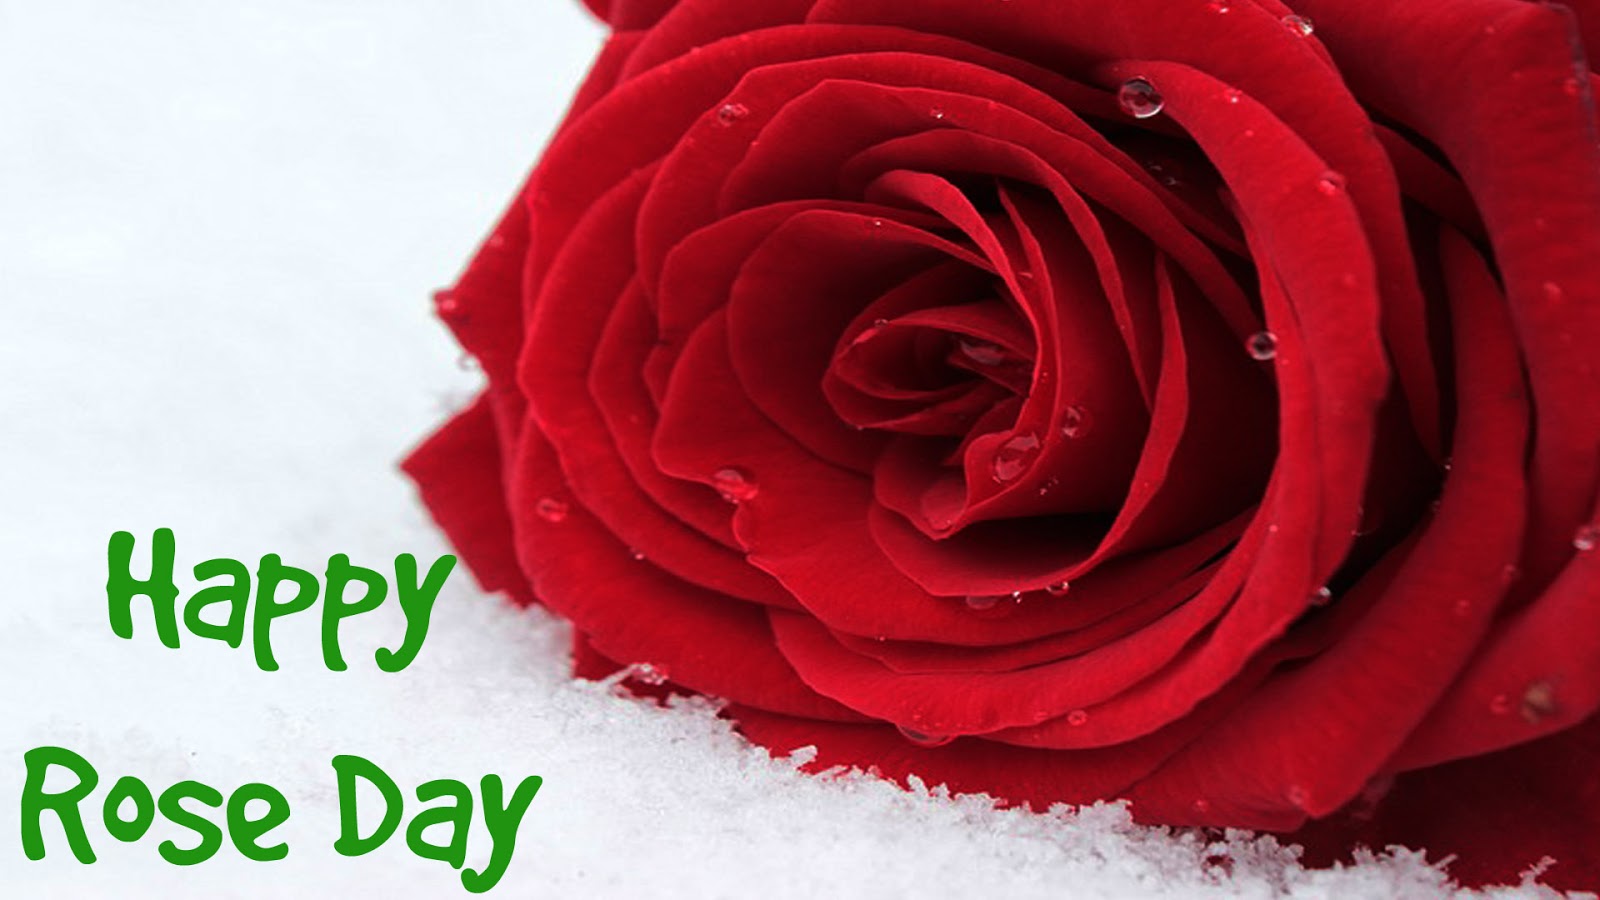 Happy Rose Day Wallpapers - Garden Roses - HD Wallpaper 